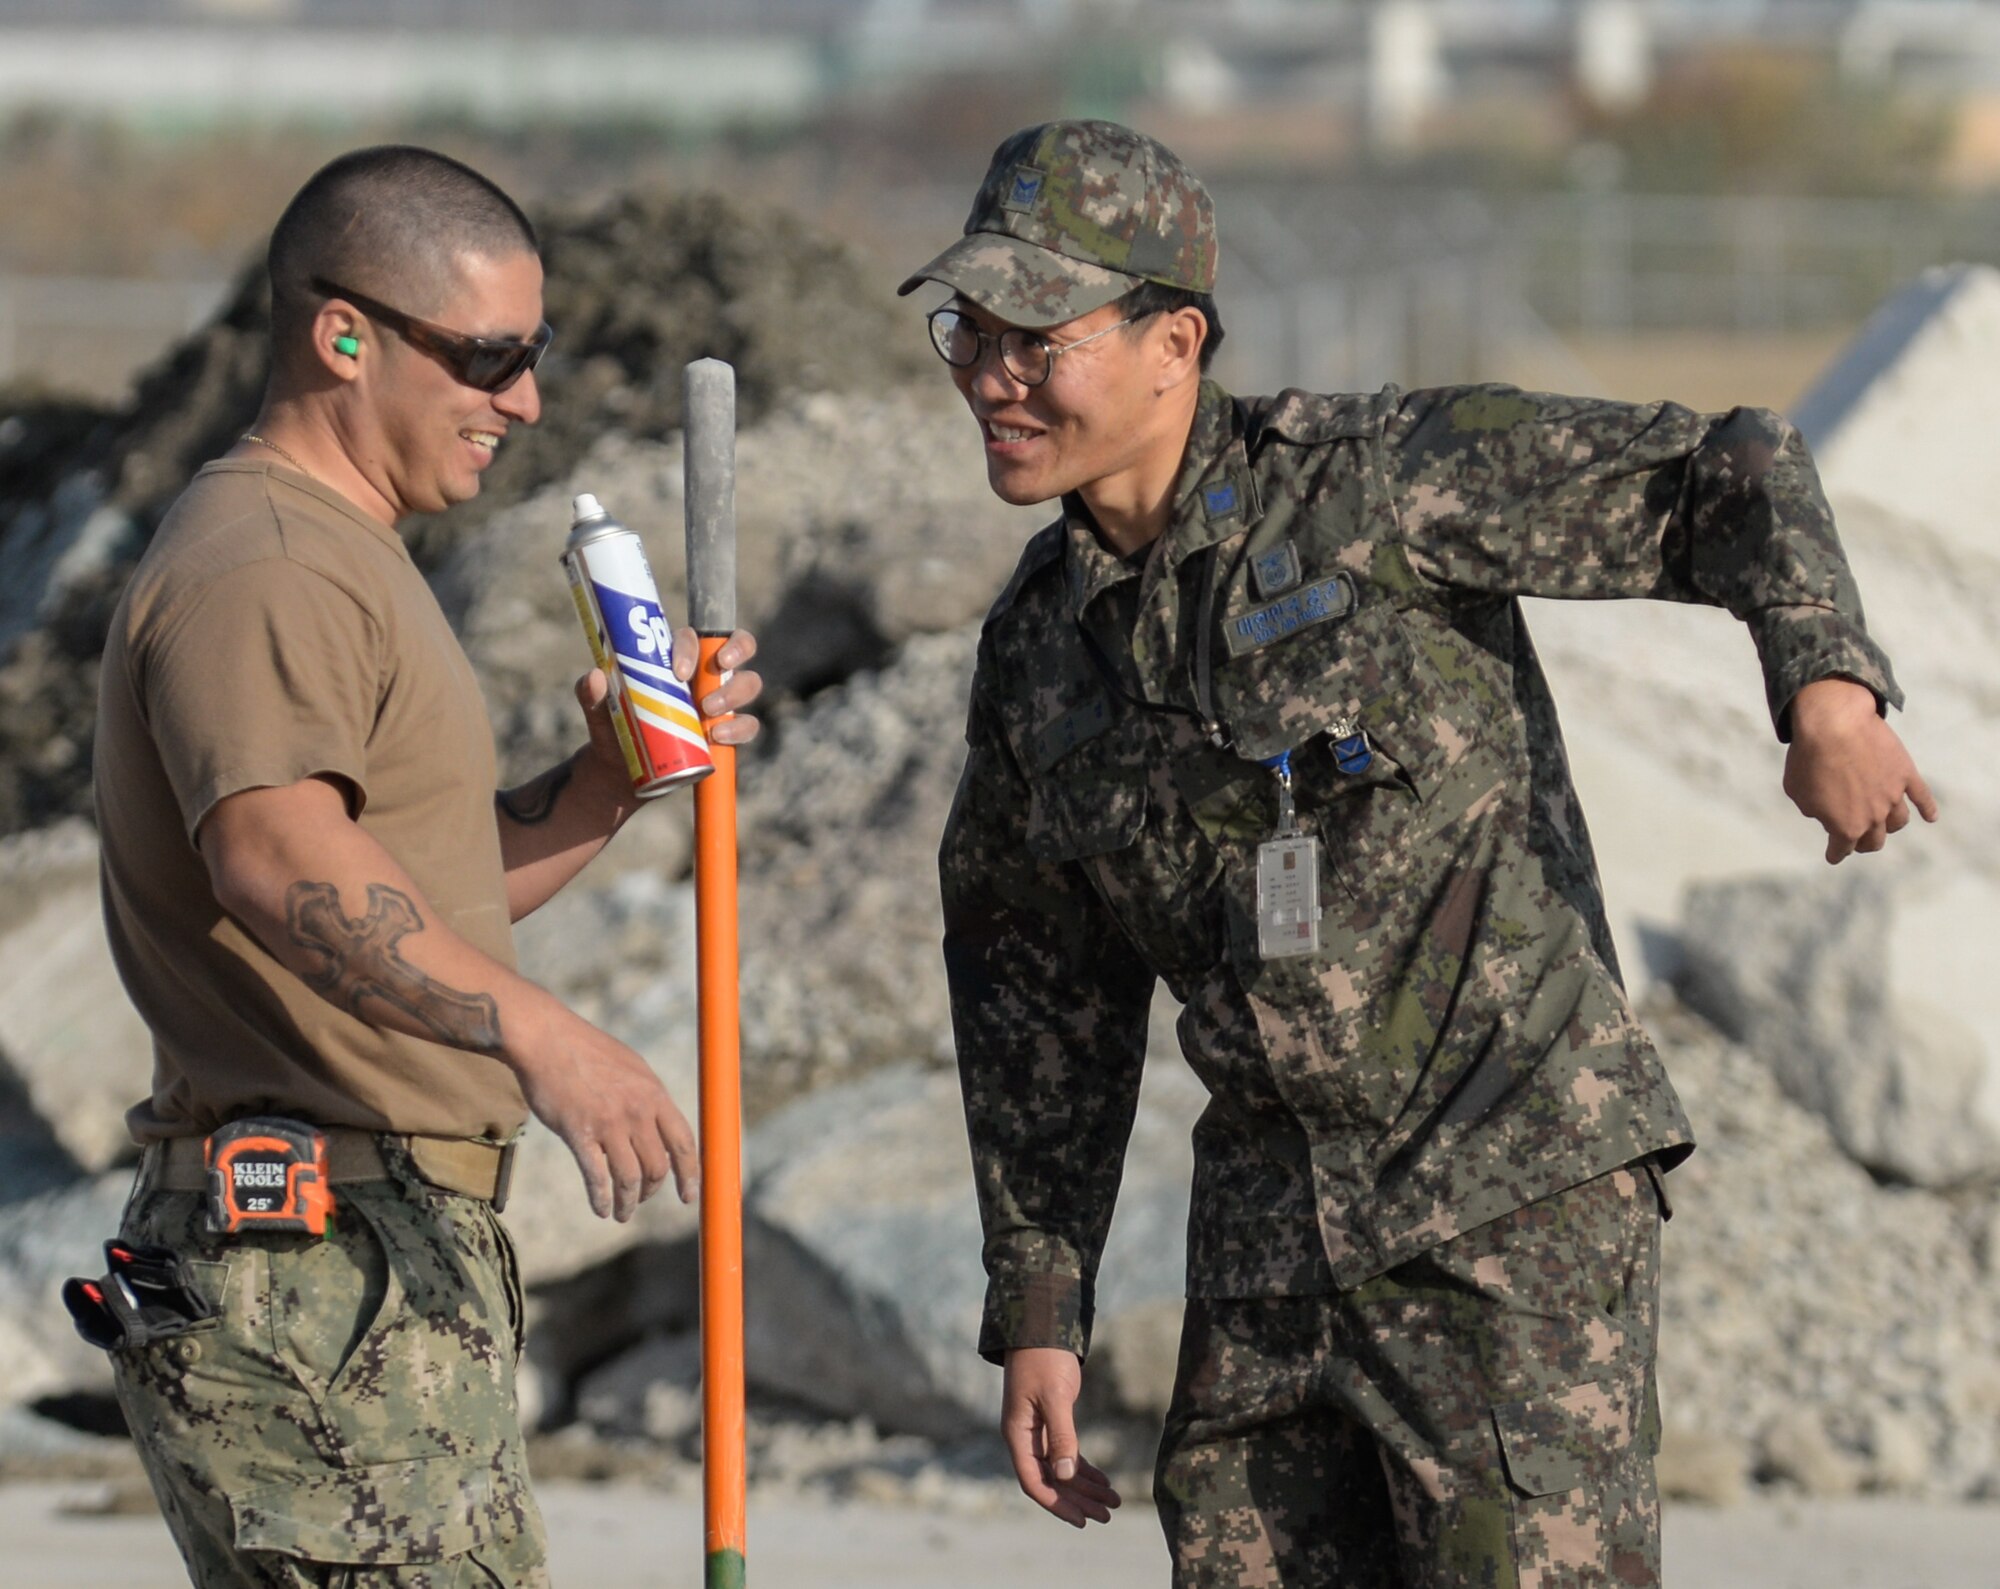 A U.S. Navy Seaman and a Republic of Korea Air Force Airman interact during a Rapid Airfield Damage Repair training exercise at Gwangju Air Base, R.O.K., Nov. 8, 2017. Similar to an assembly line, RADR systematically lines up civil engineer personnel and equipment to quickly repair a runway after attack. The training exercise was designed to enhance interoperability, prepare for wartime contingencies and build partnership capacity in the Indo-Asia Pacific region. (U.S. Air Force photo by Senior Airman Curt Beach)